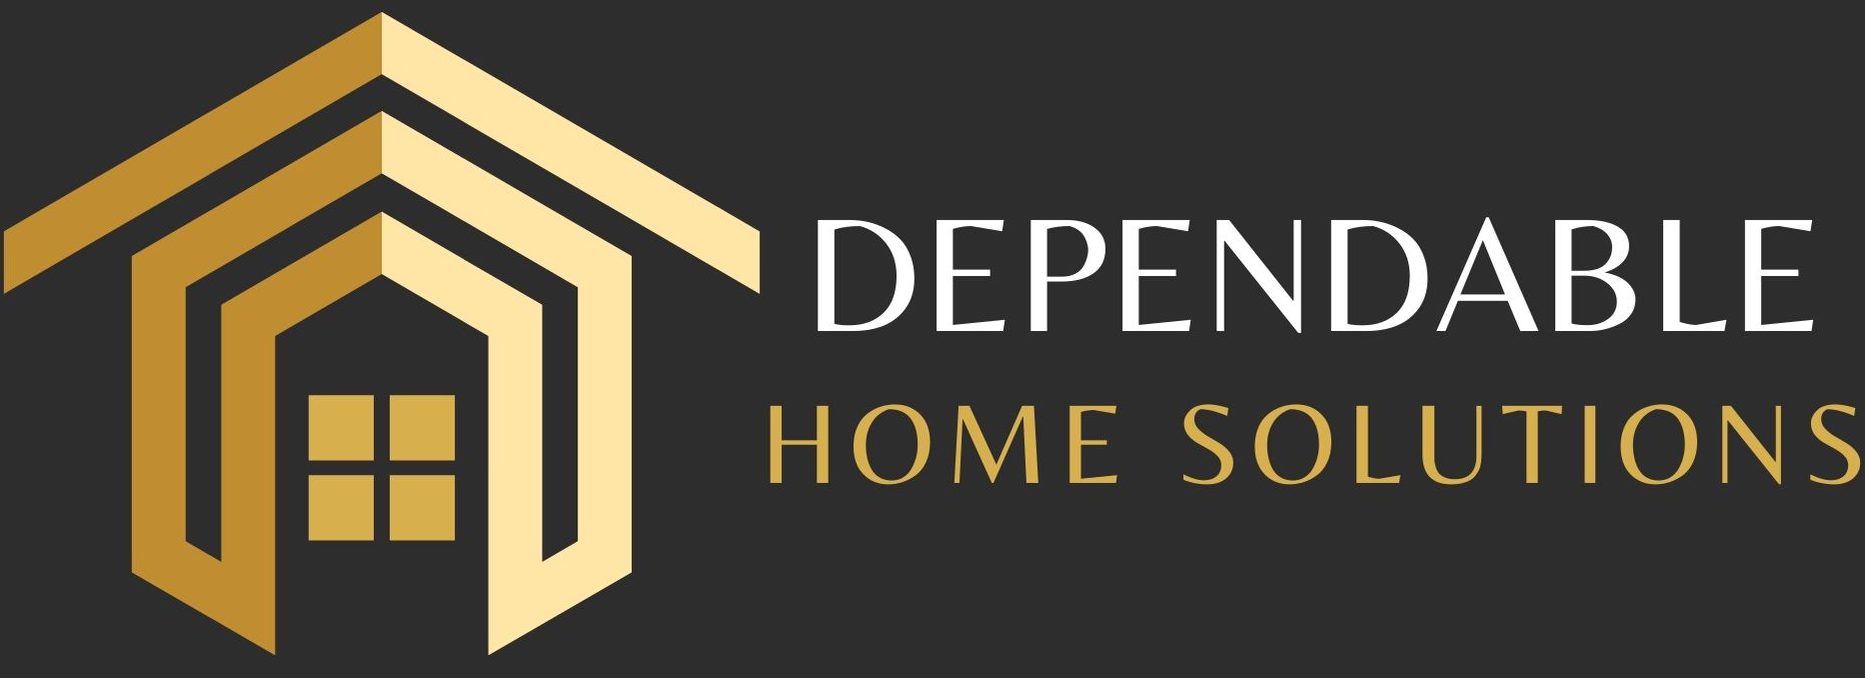 Dependable Home Solutions